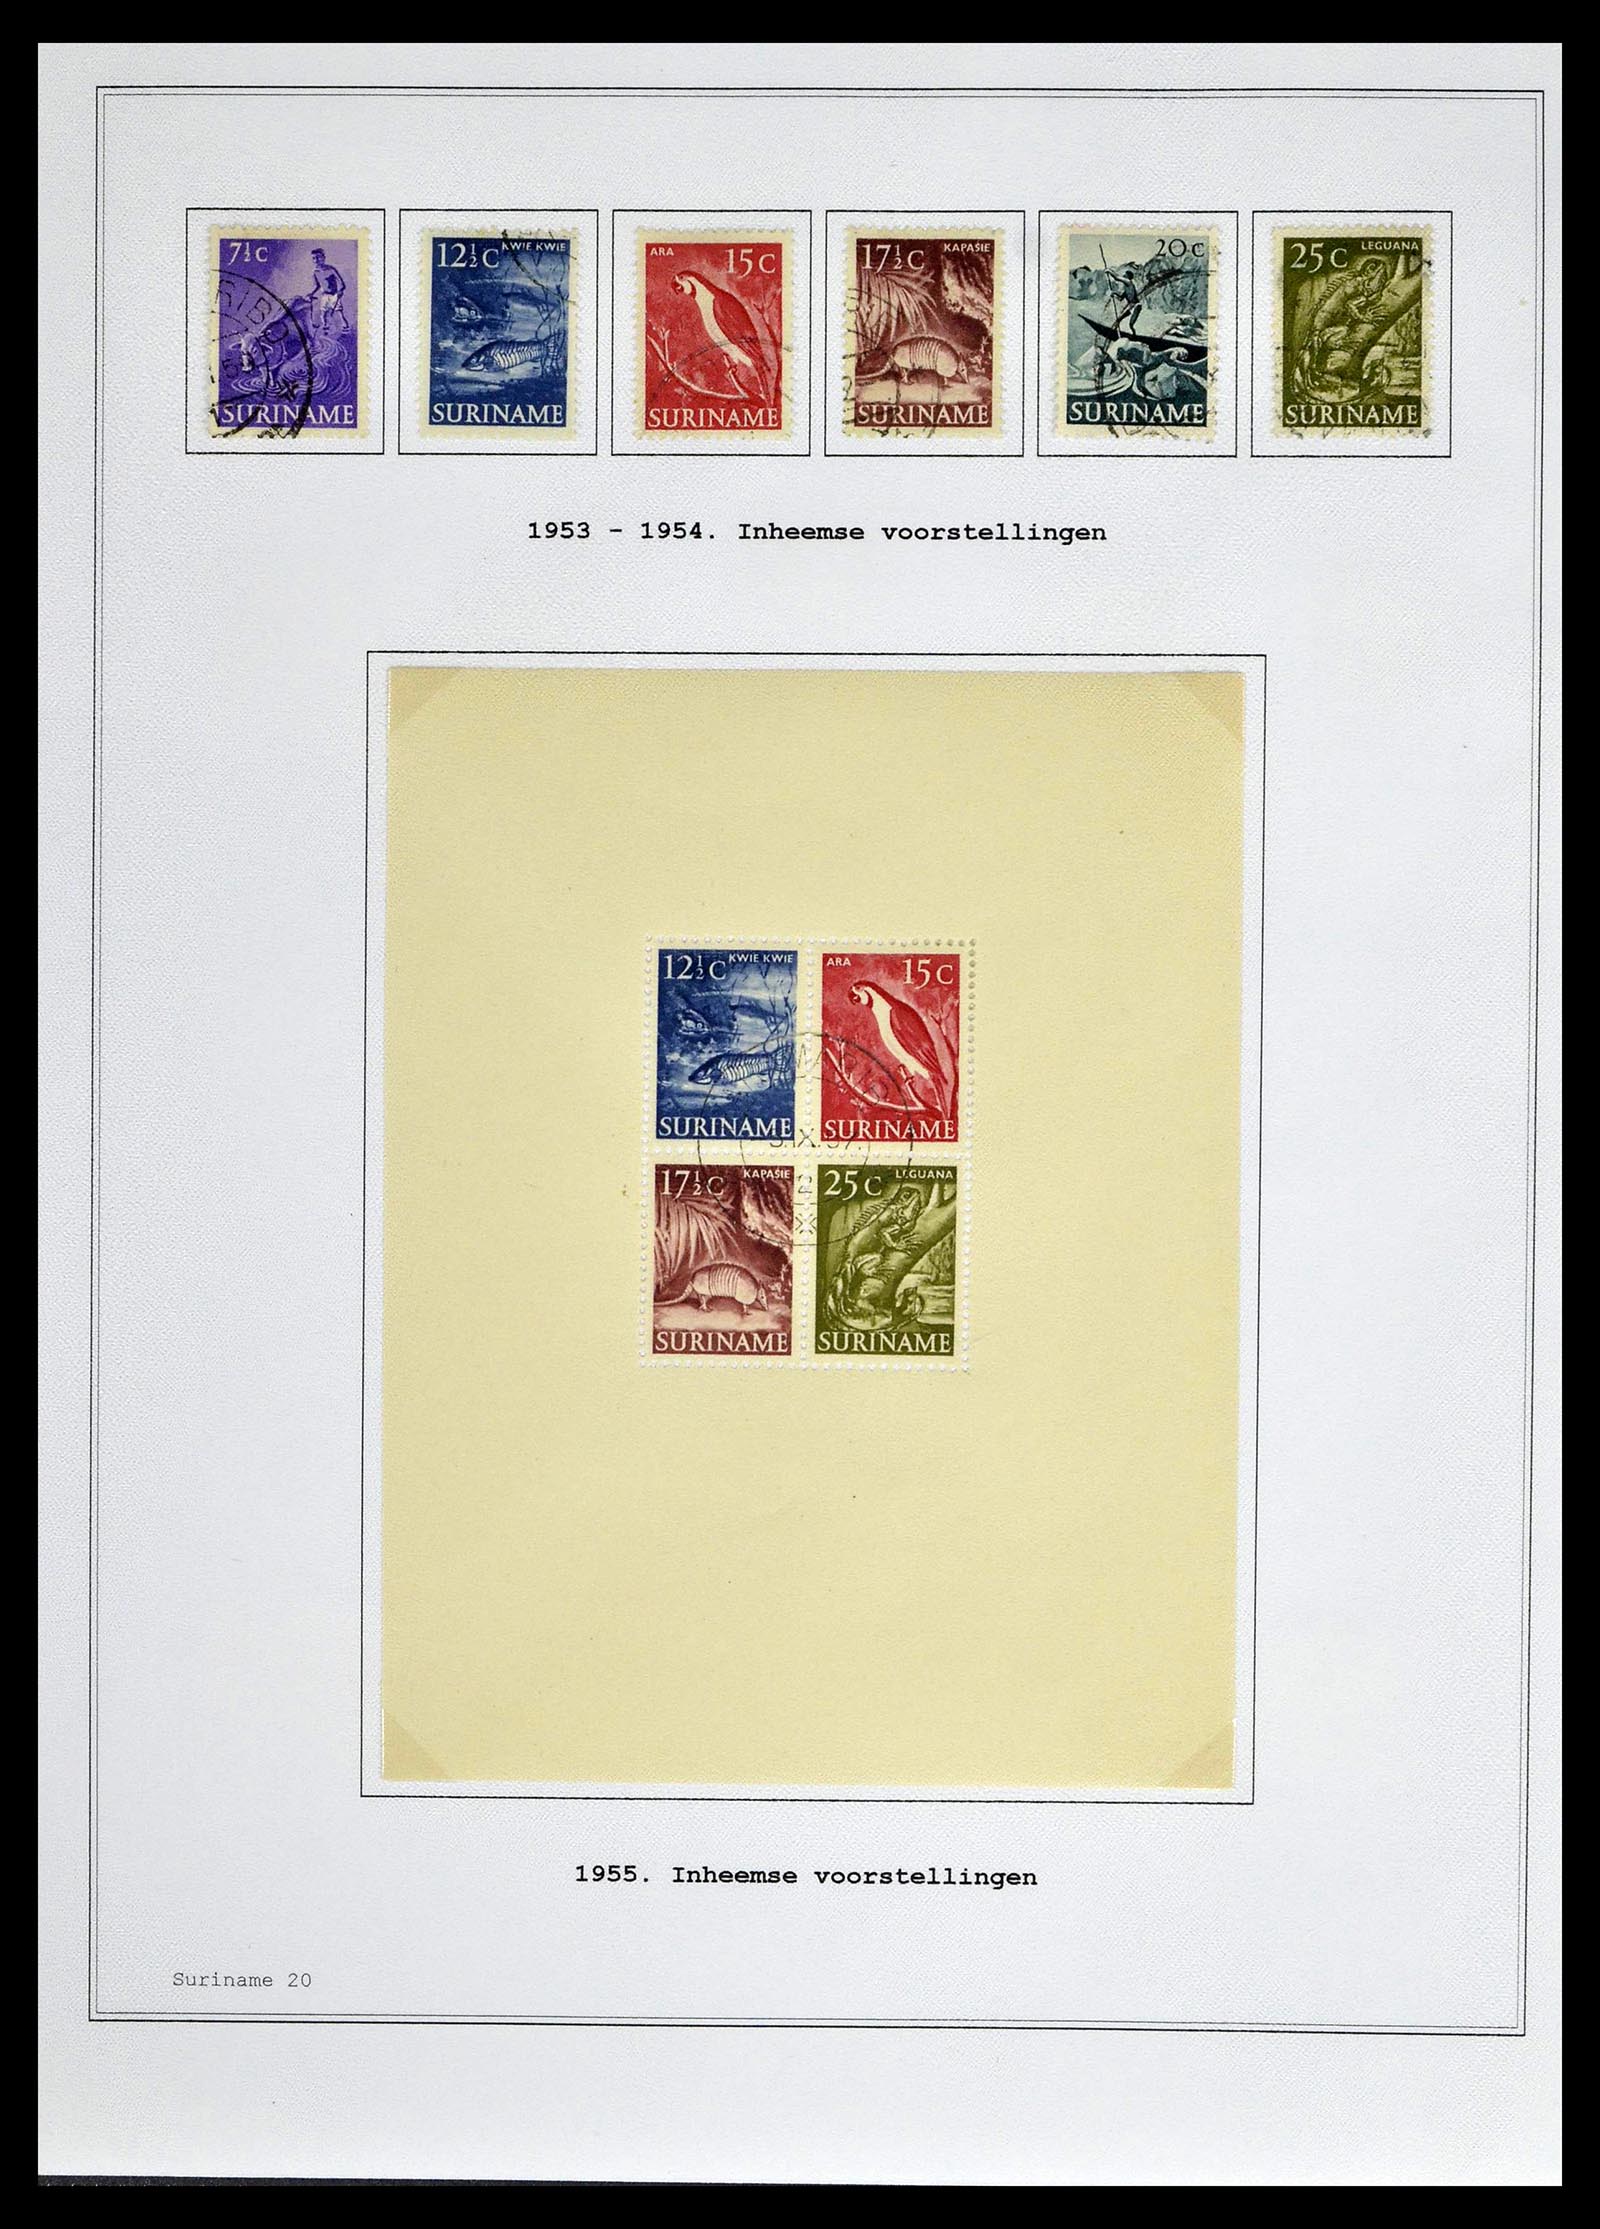 39026 0131 - Stamp collection 39026 Dutch east Indies and Suriname 1864-1975.